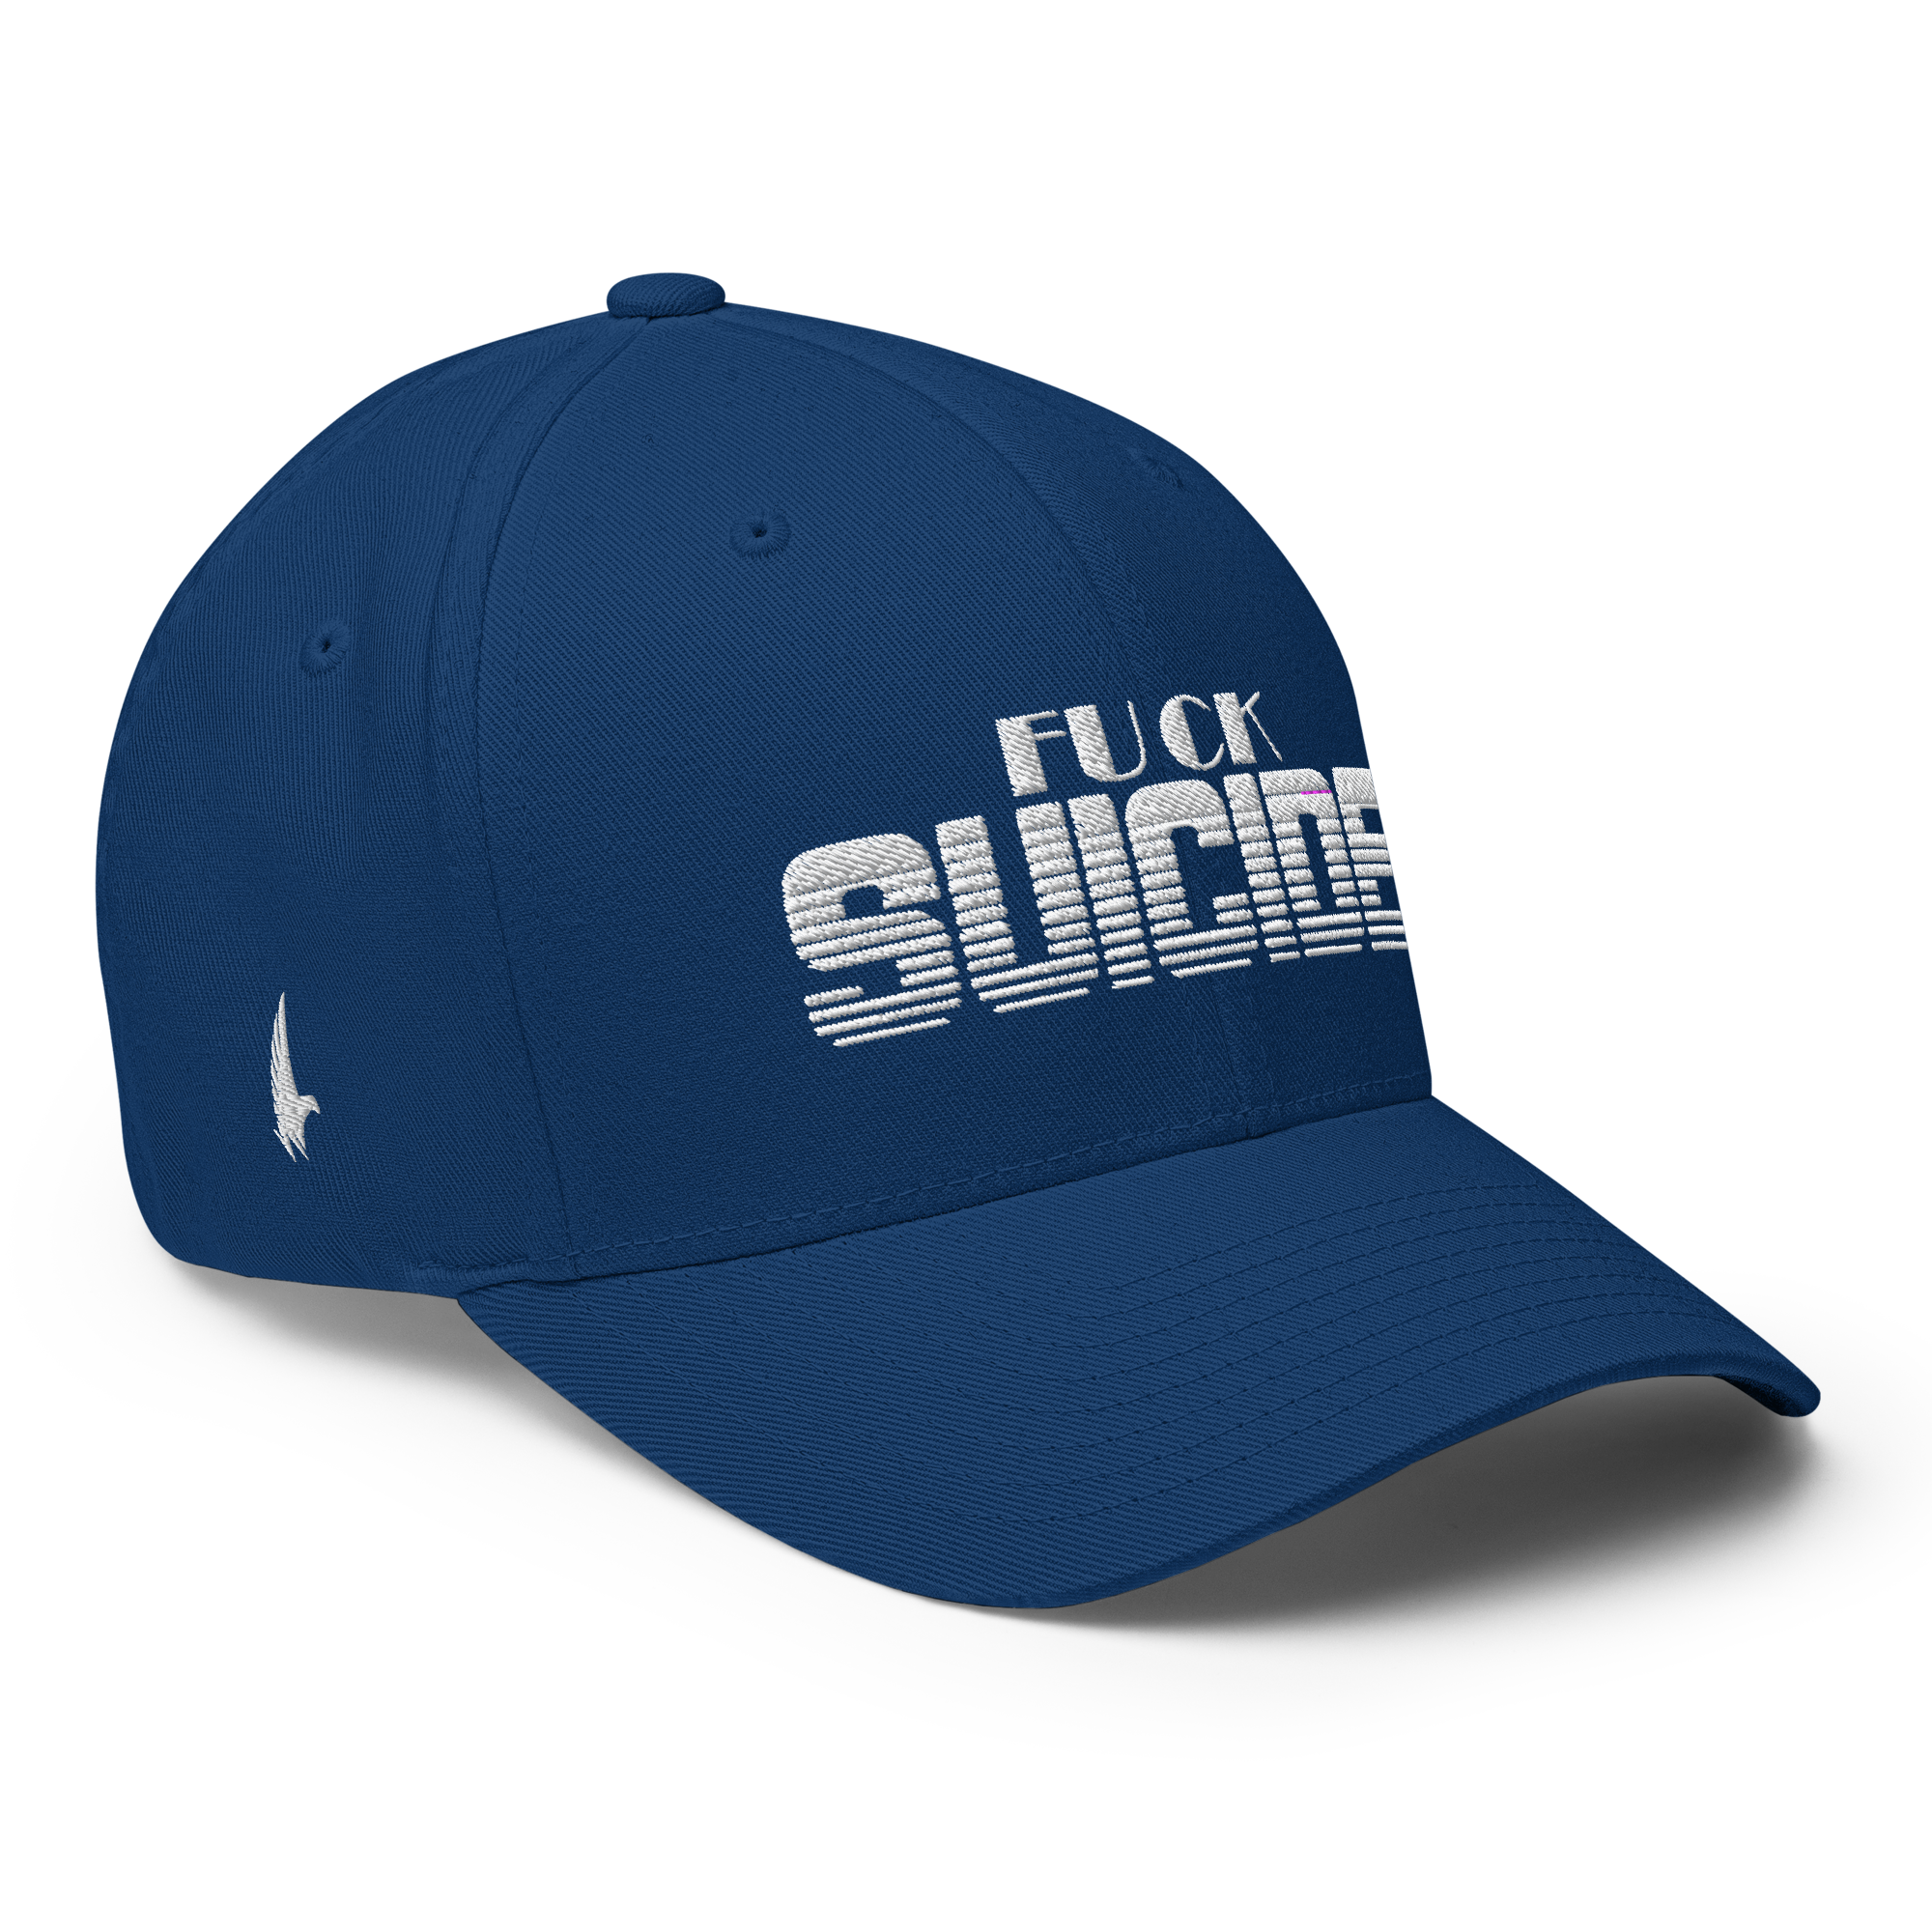 Fk Suicide Fitted Hat Blue Fitted - Loyalty Vibes